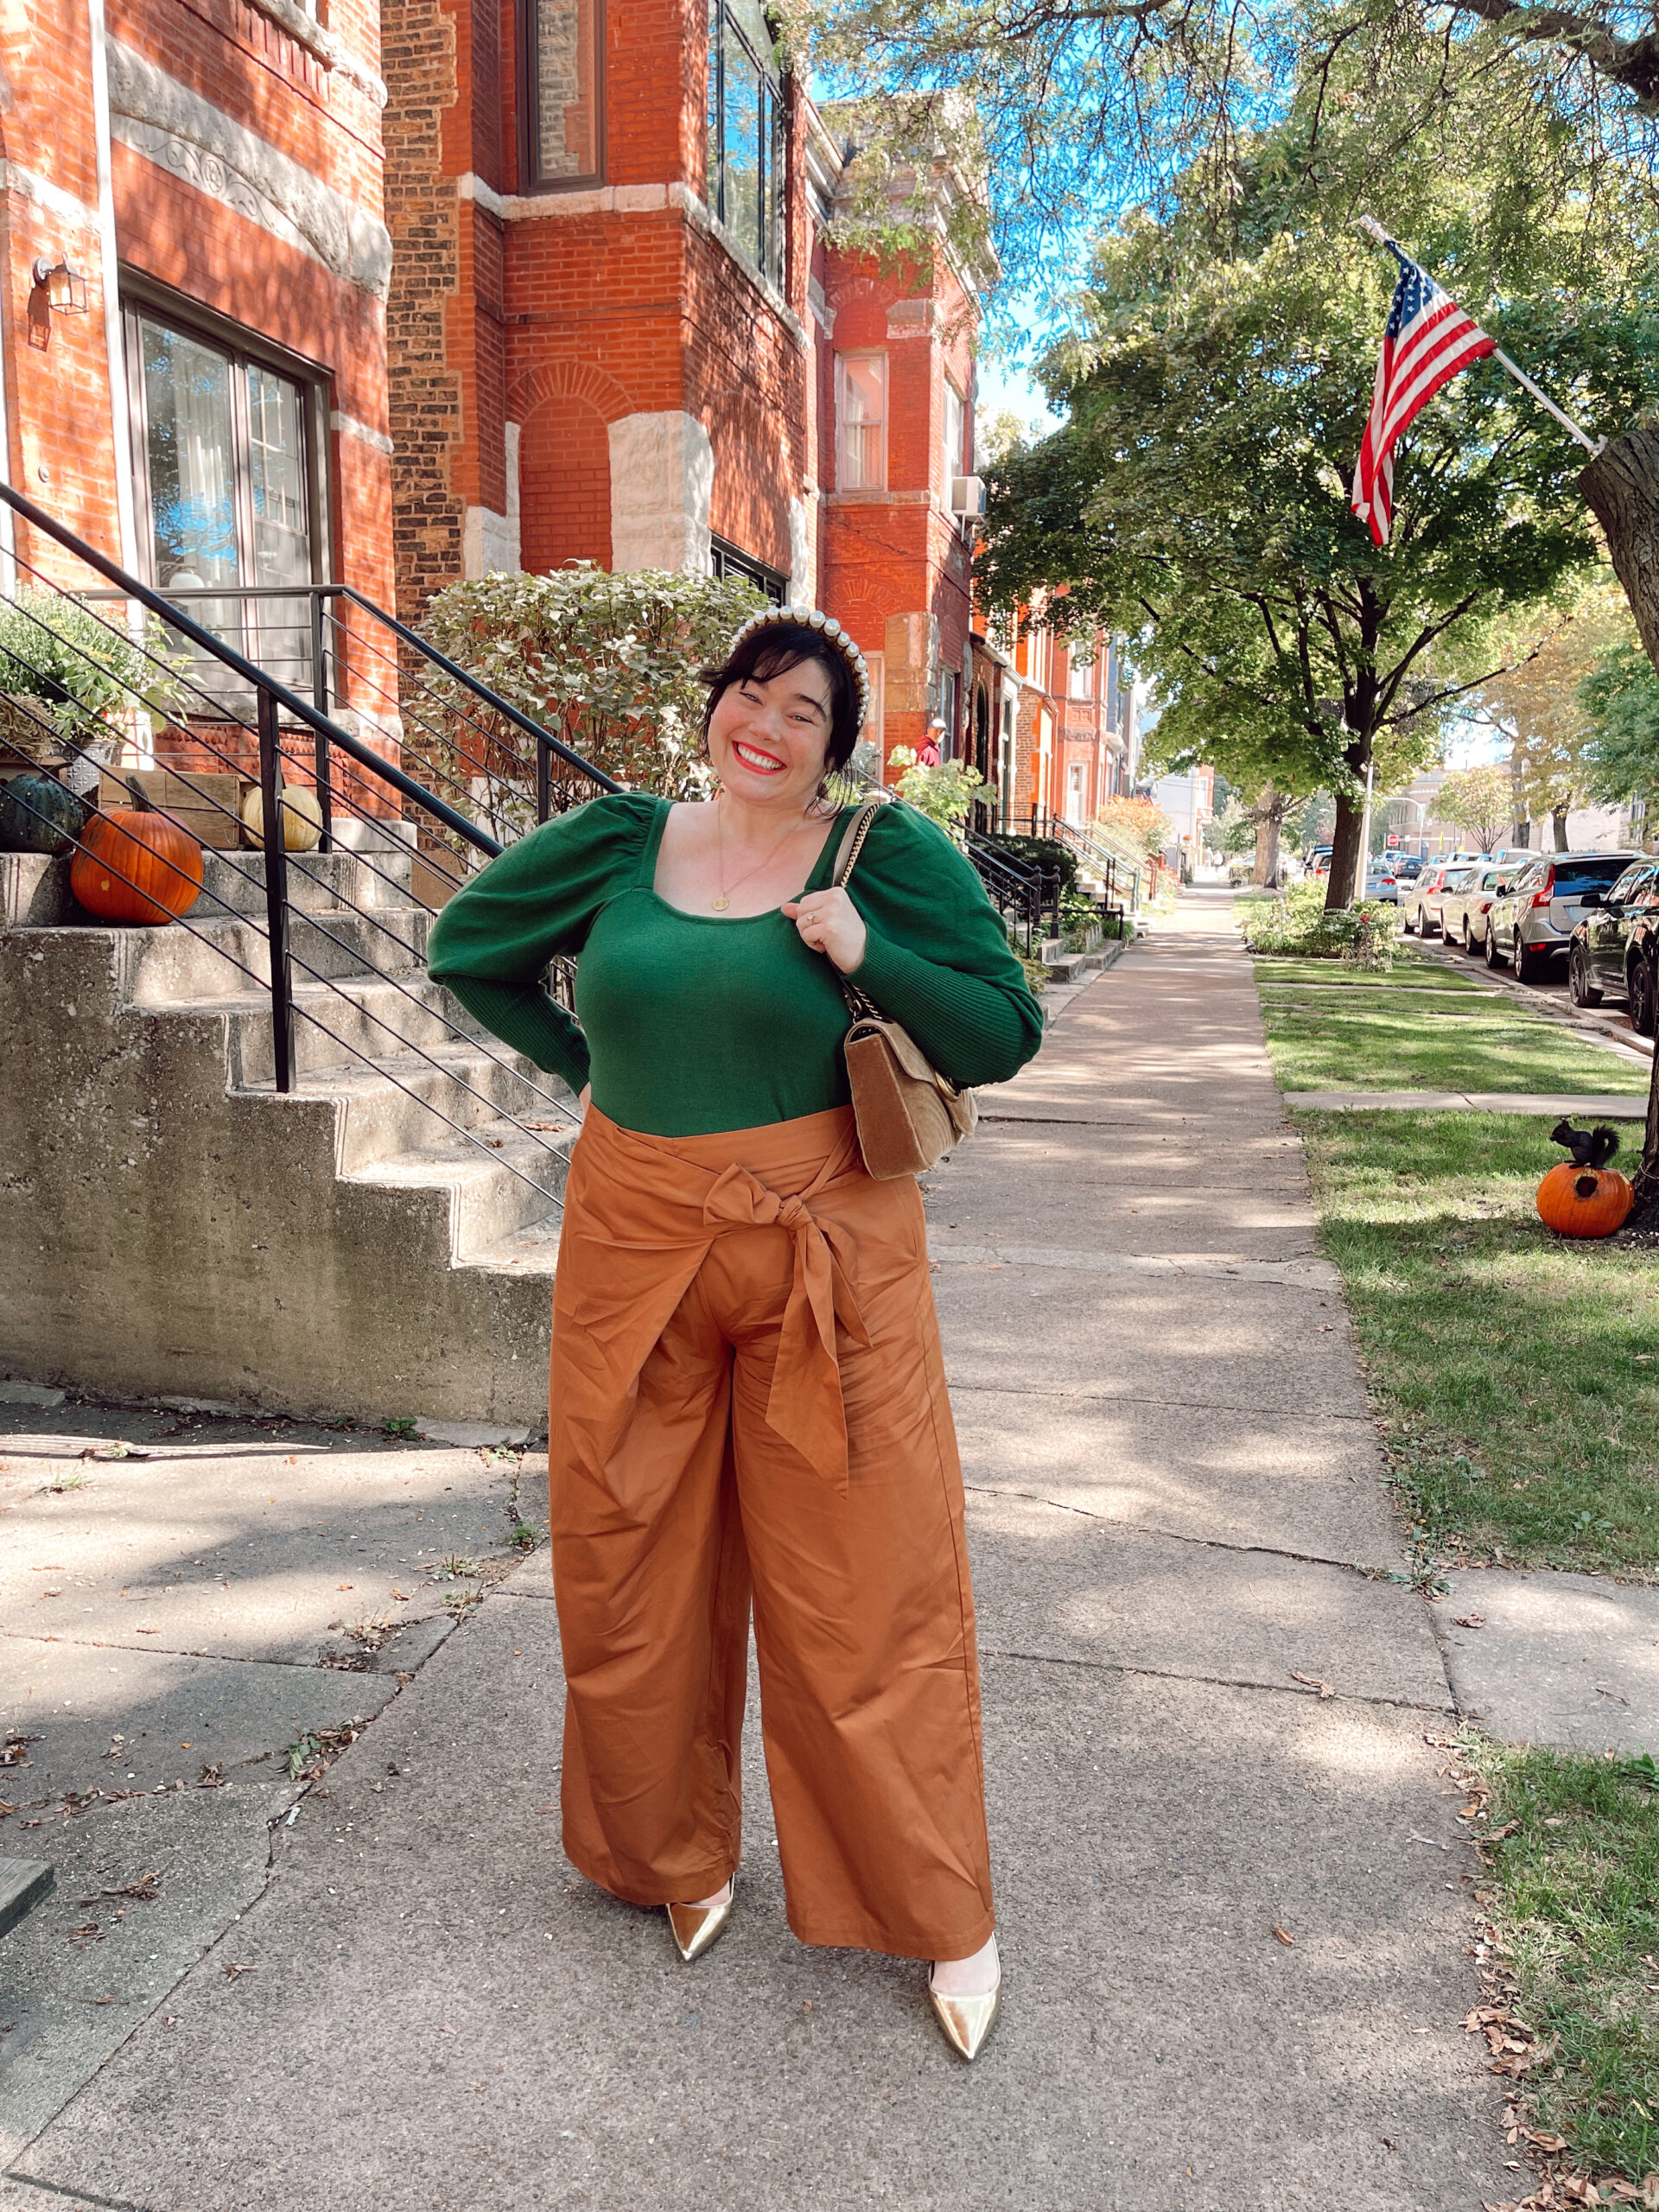 Plus Size Green and Tan Fall Outfit